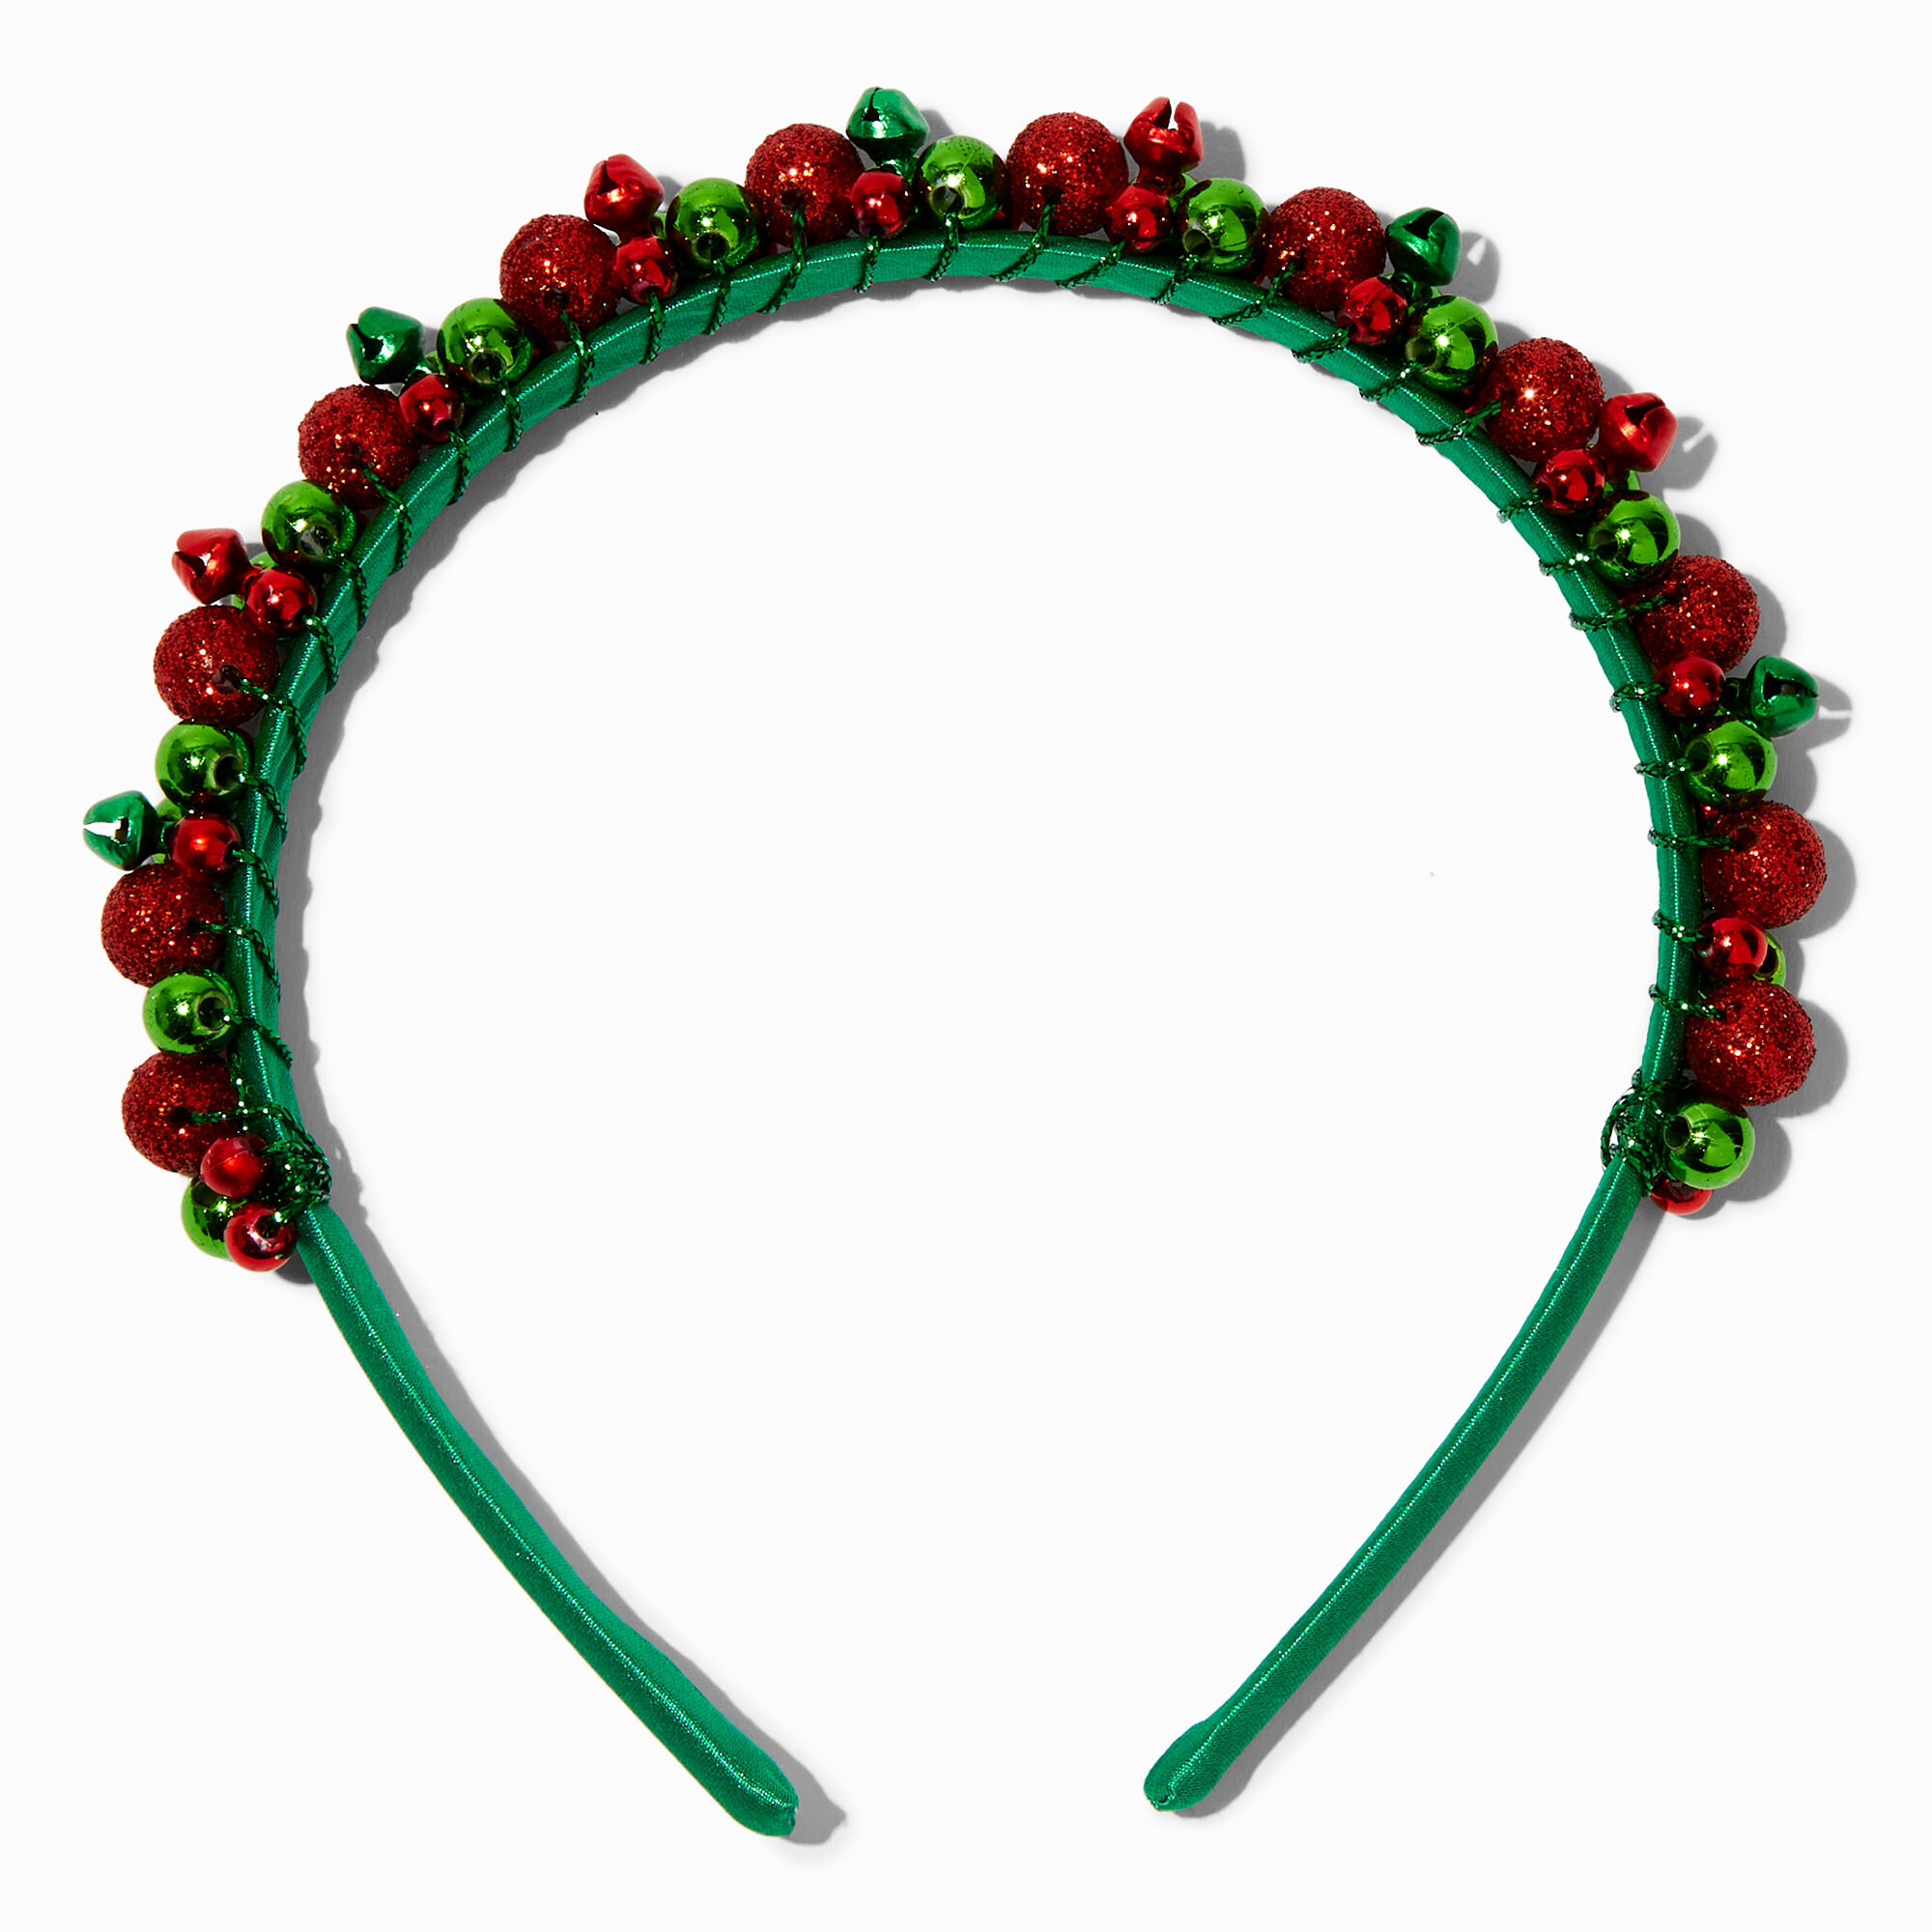 View Claires Christmas Ornaments Jingle Bells Headband information